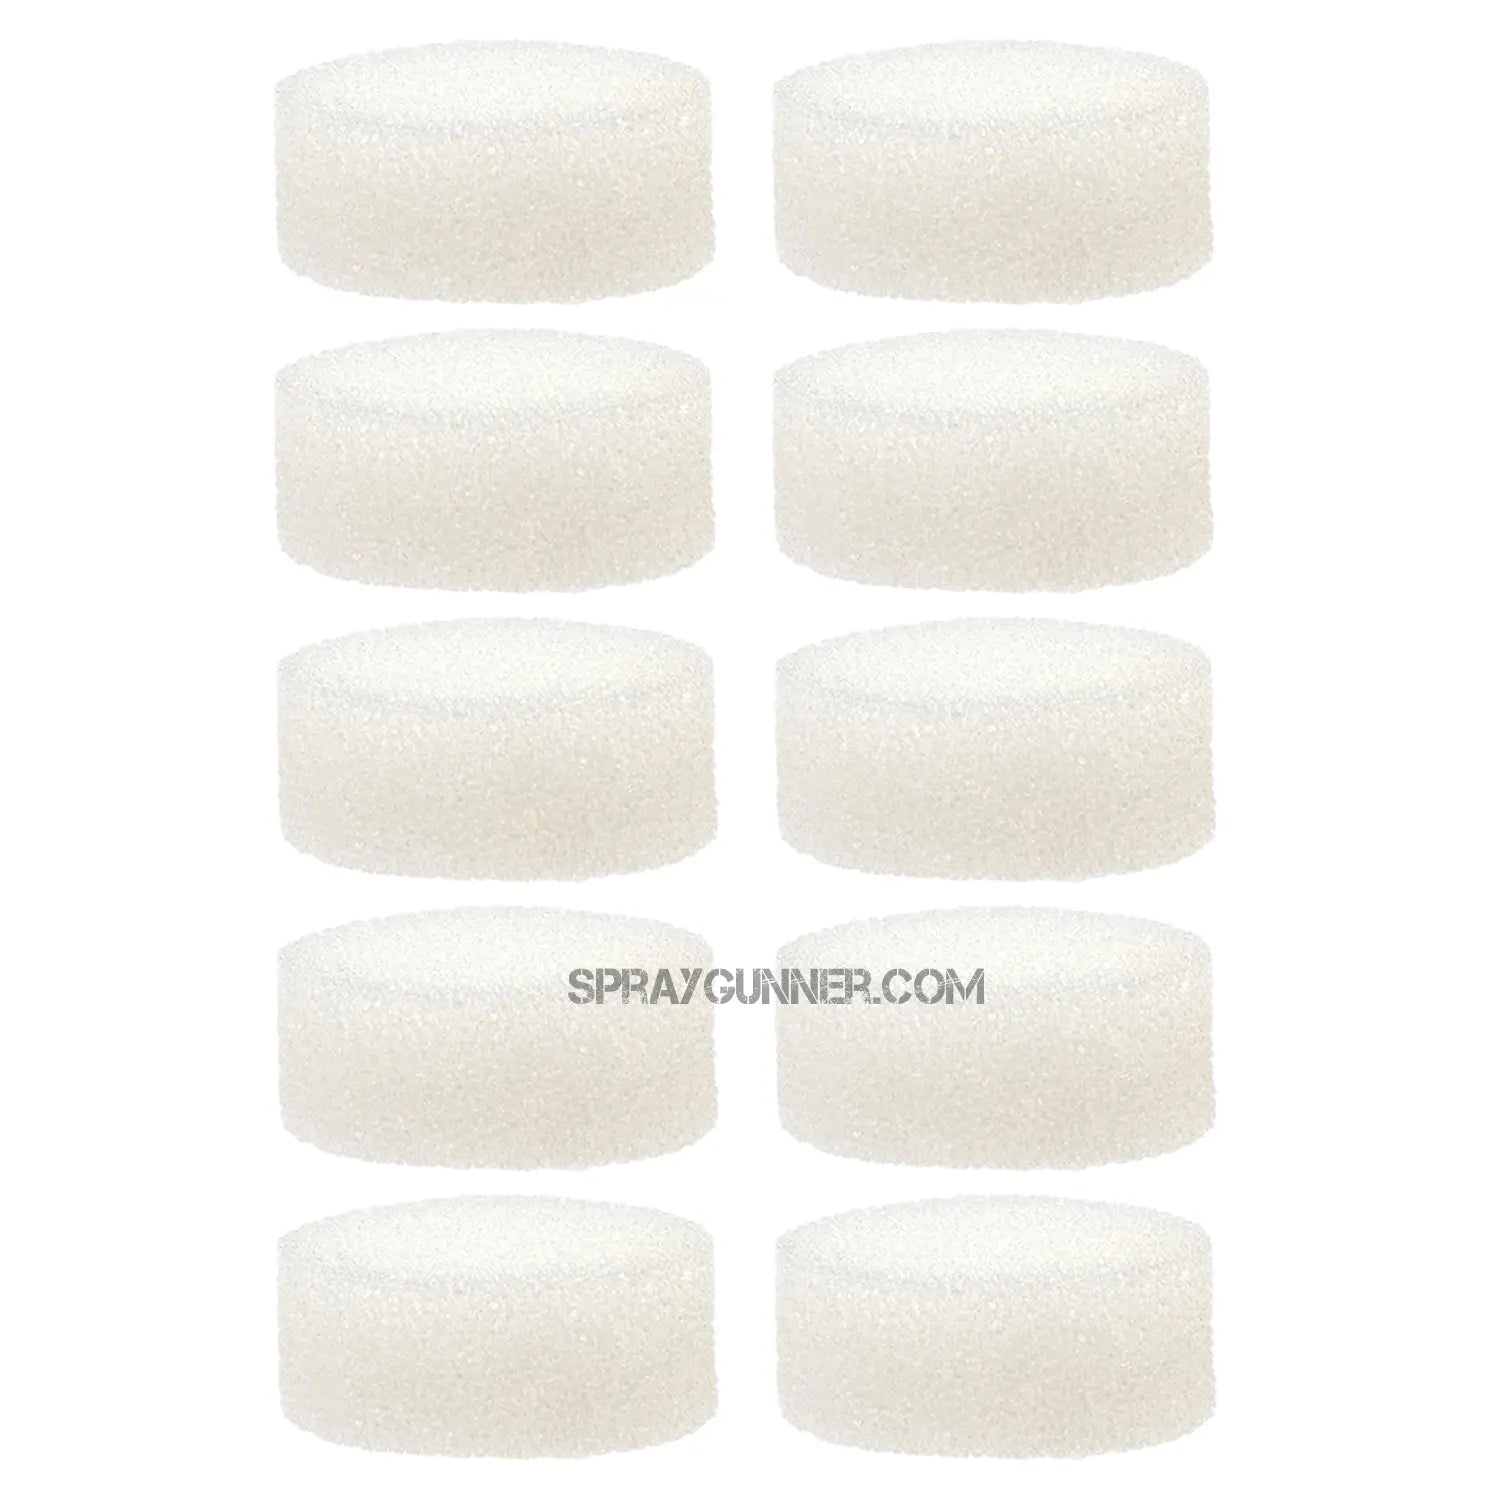 Air intake filter 10-pack. Foam filters for models IS800, 850, 875, 875HT, 925, 925HT, 975 Iwata